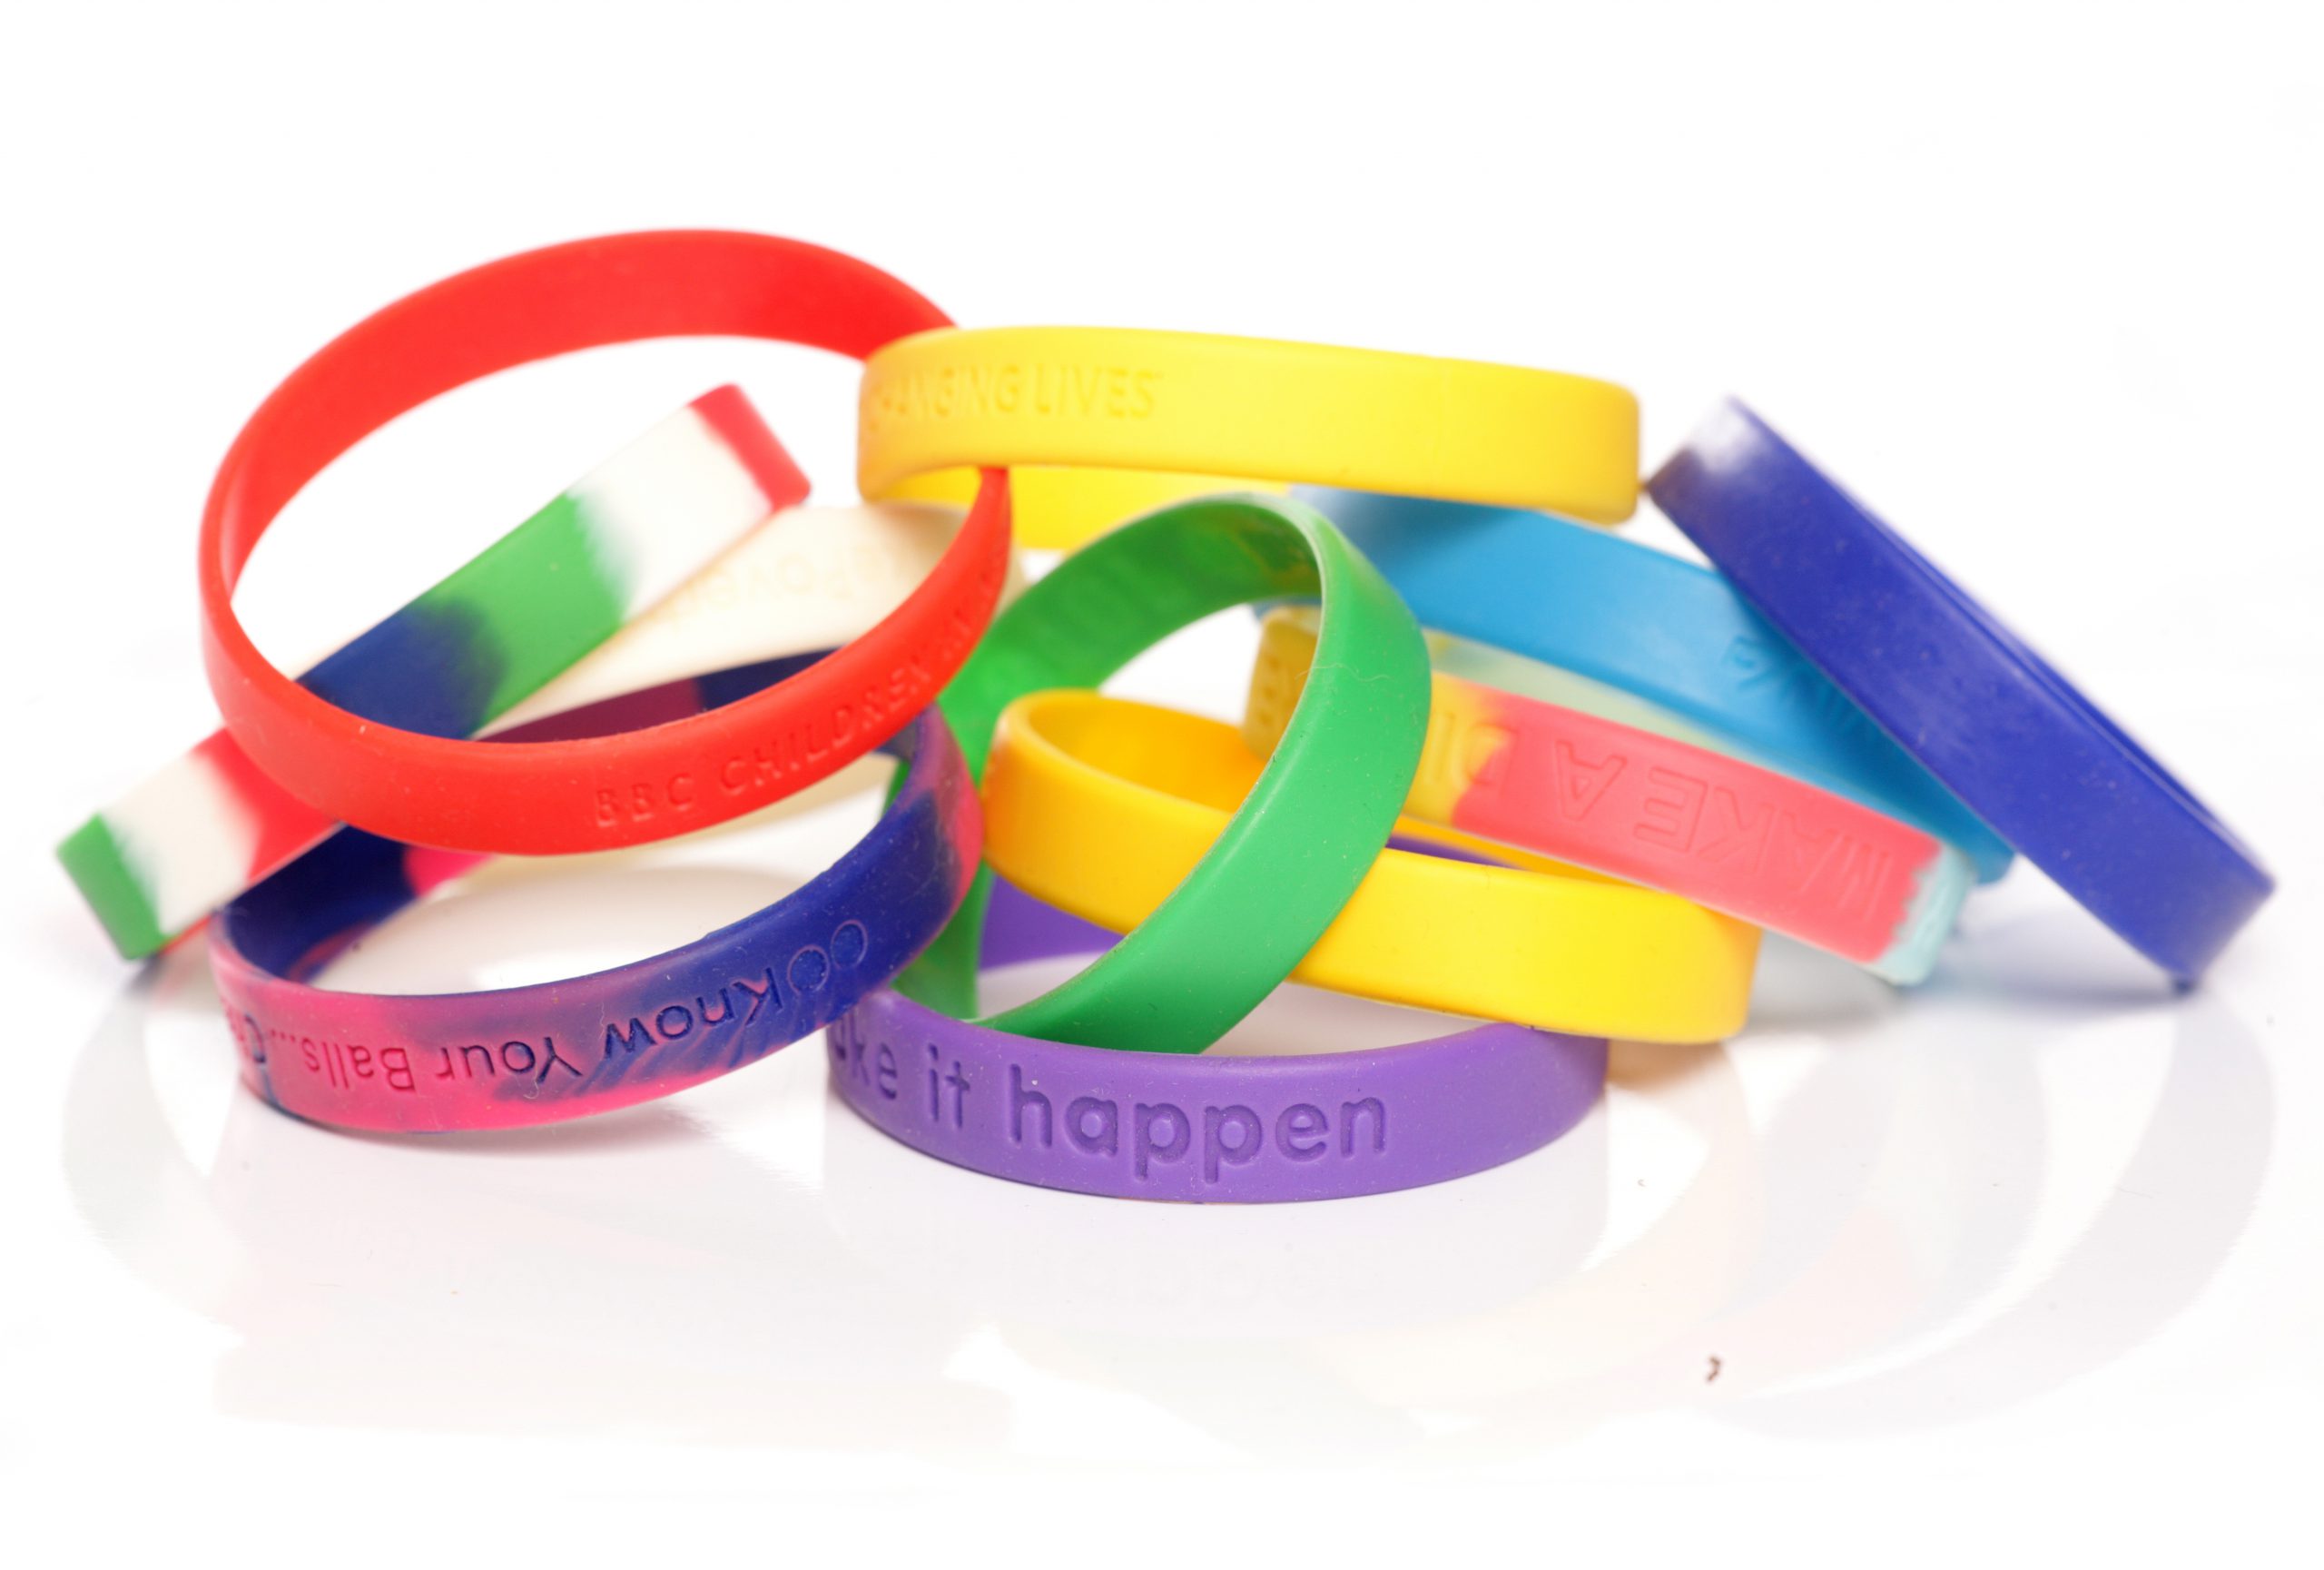 Pile of Silicone Wristbands that Can Be Used for Corporate Events